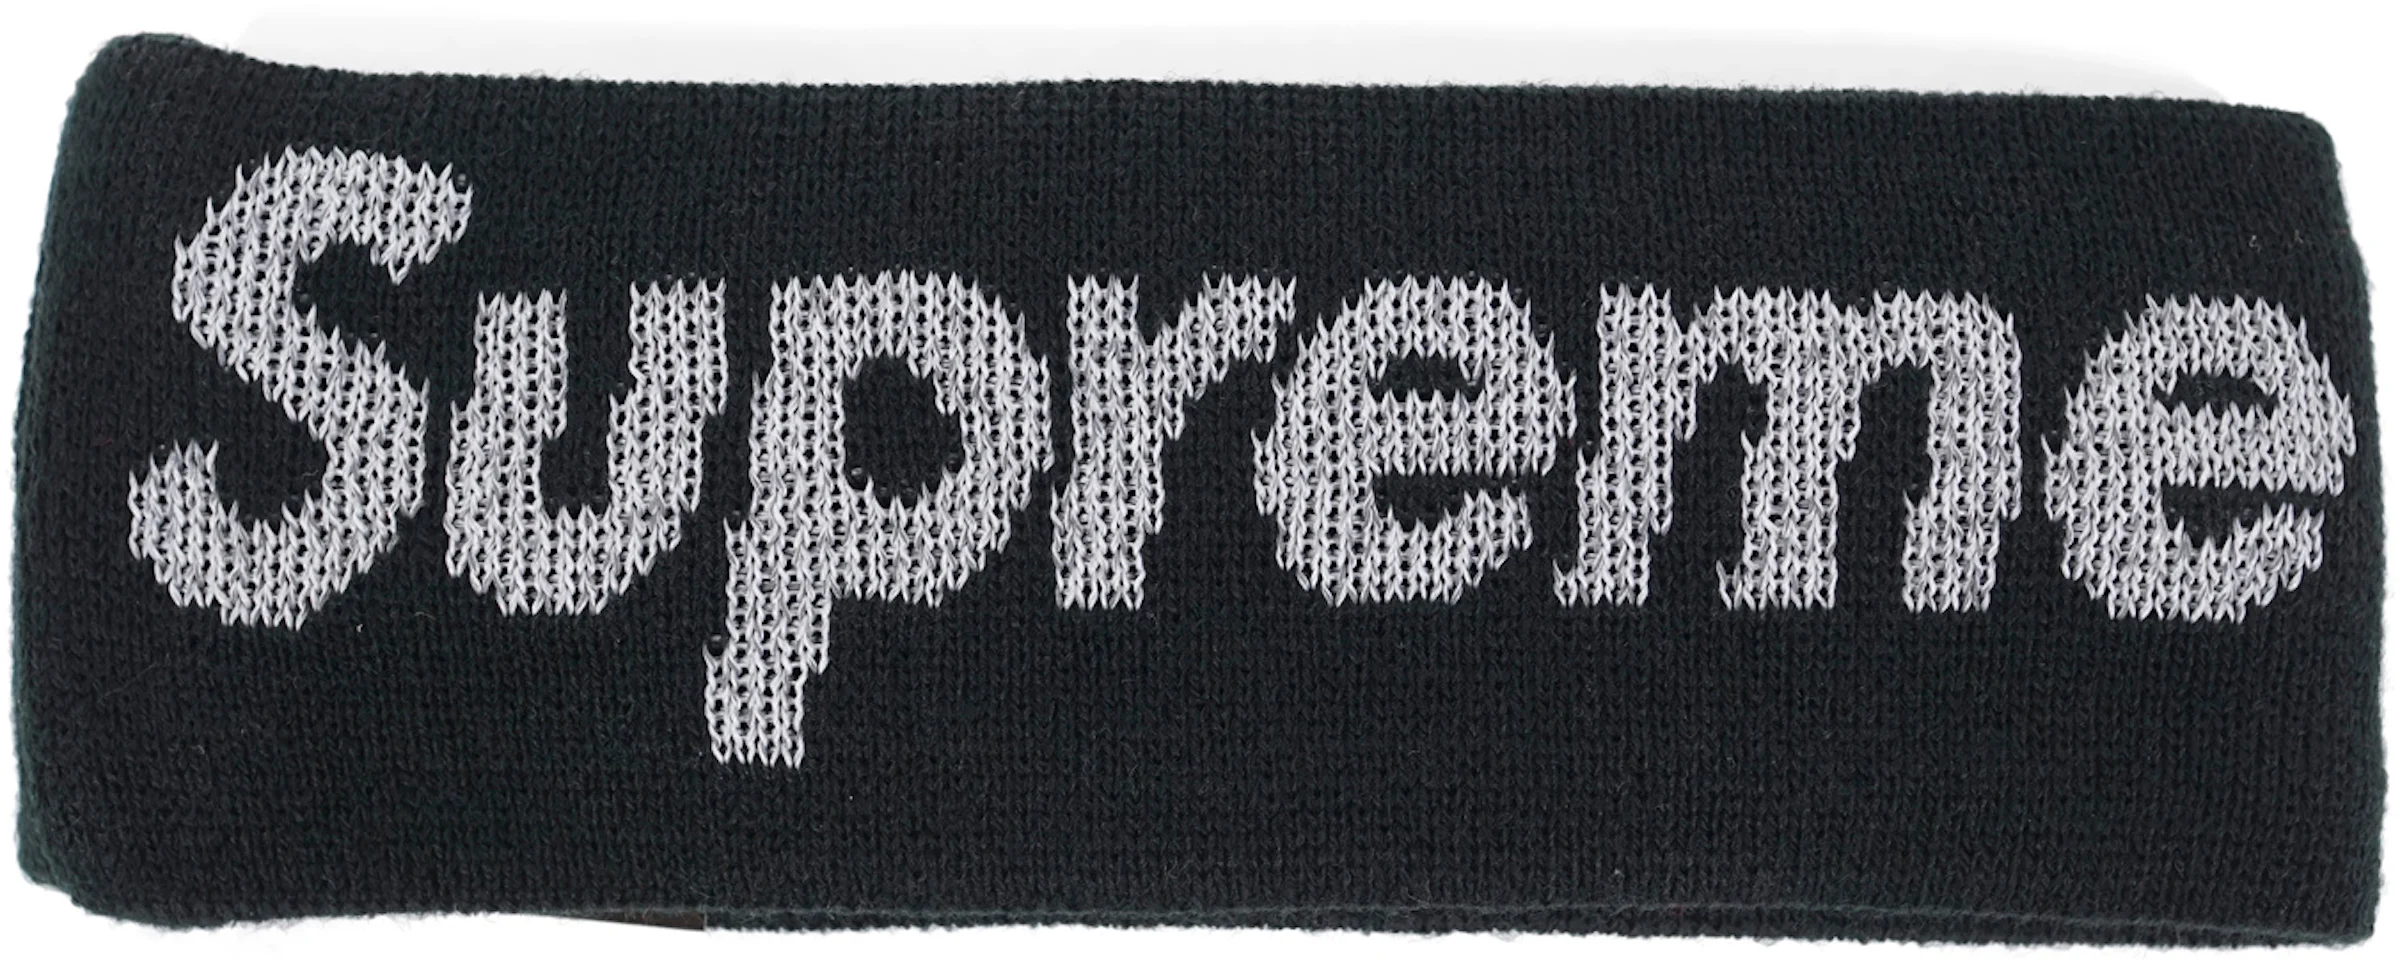 Secret Sneaker Store - Supreme FW18 New Era headbands have just arrived!  Available in all 4 colours, don't miss out. Afterpay available online !  #SSS